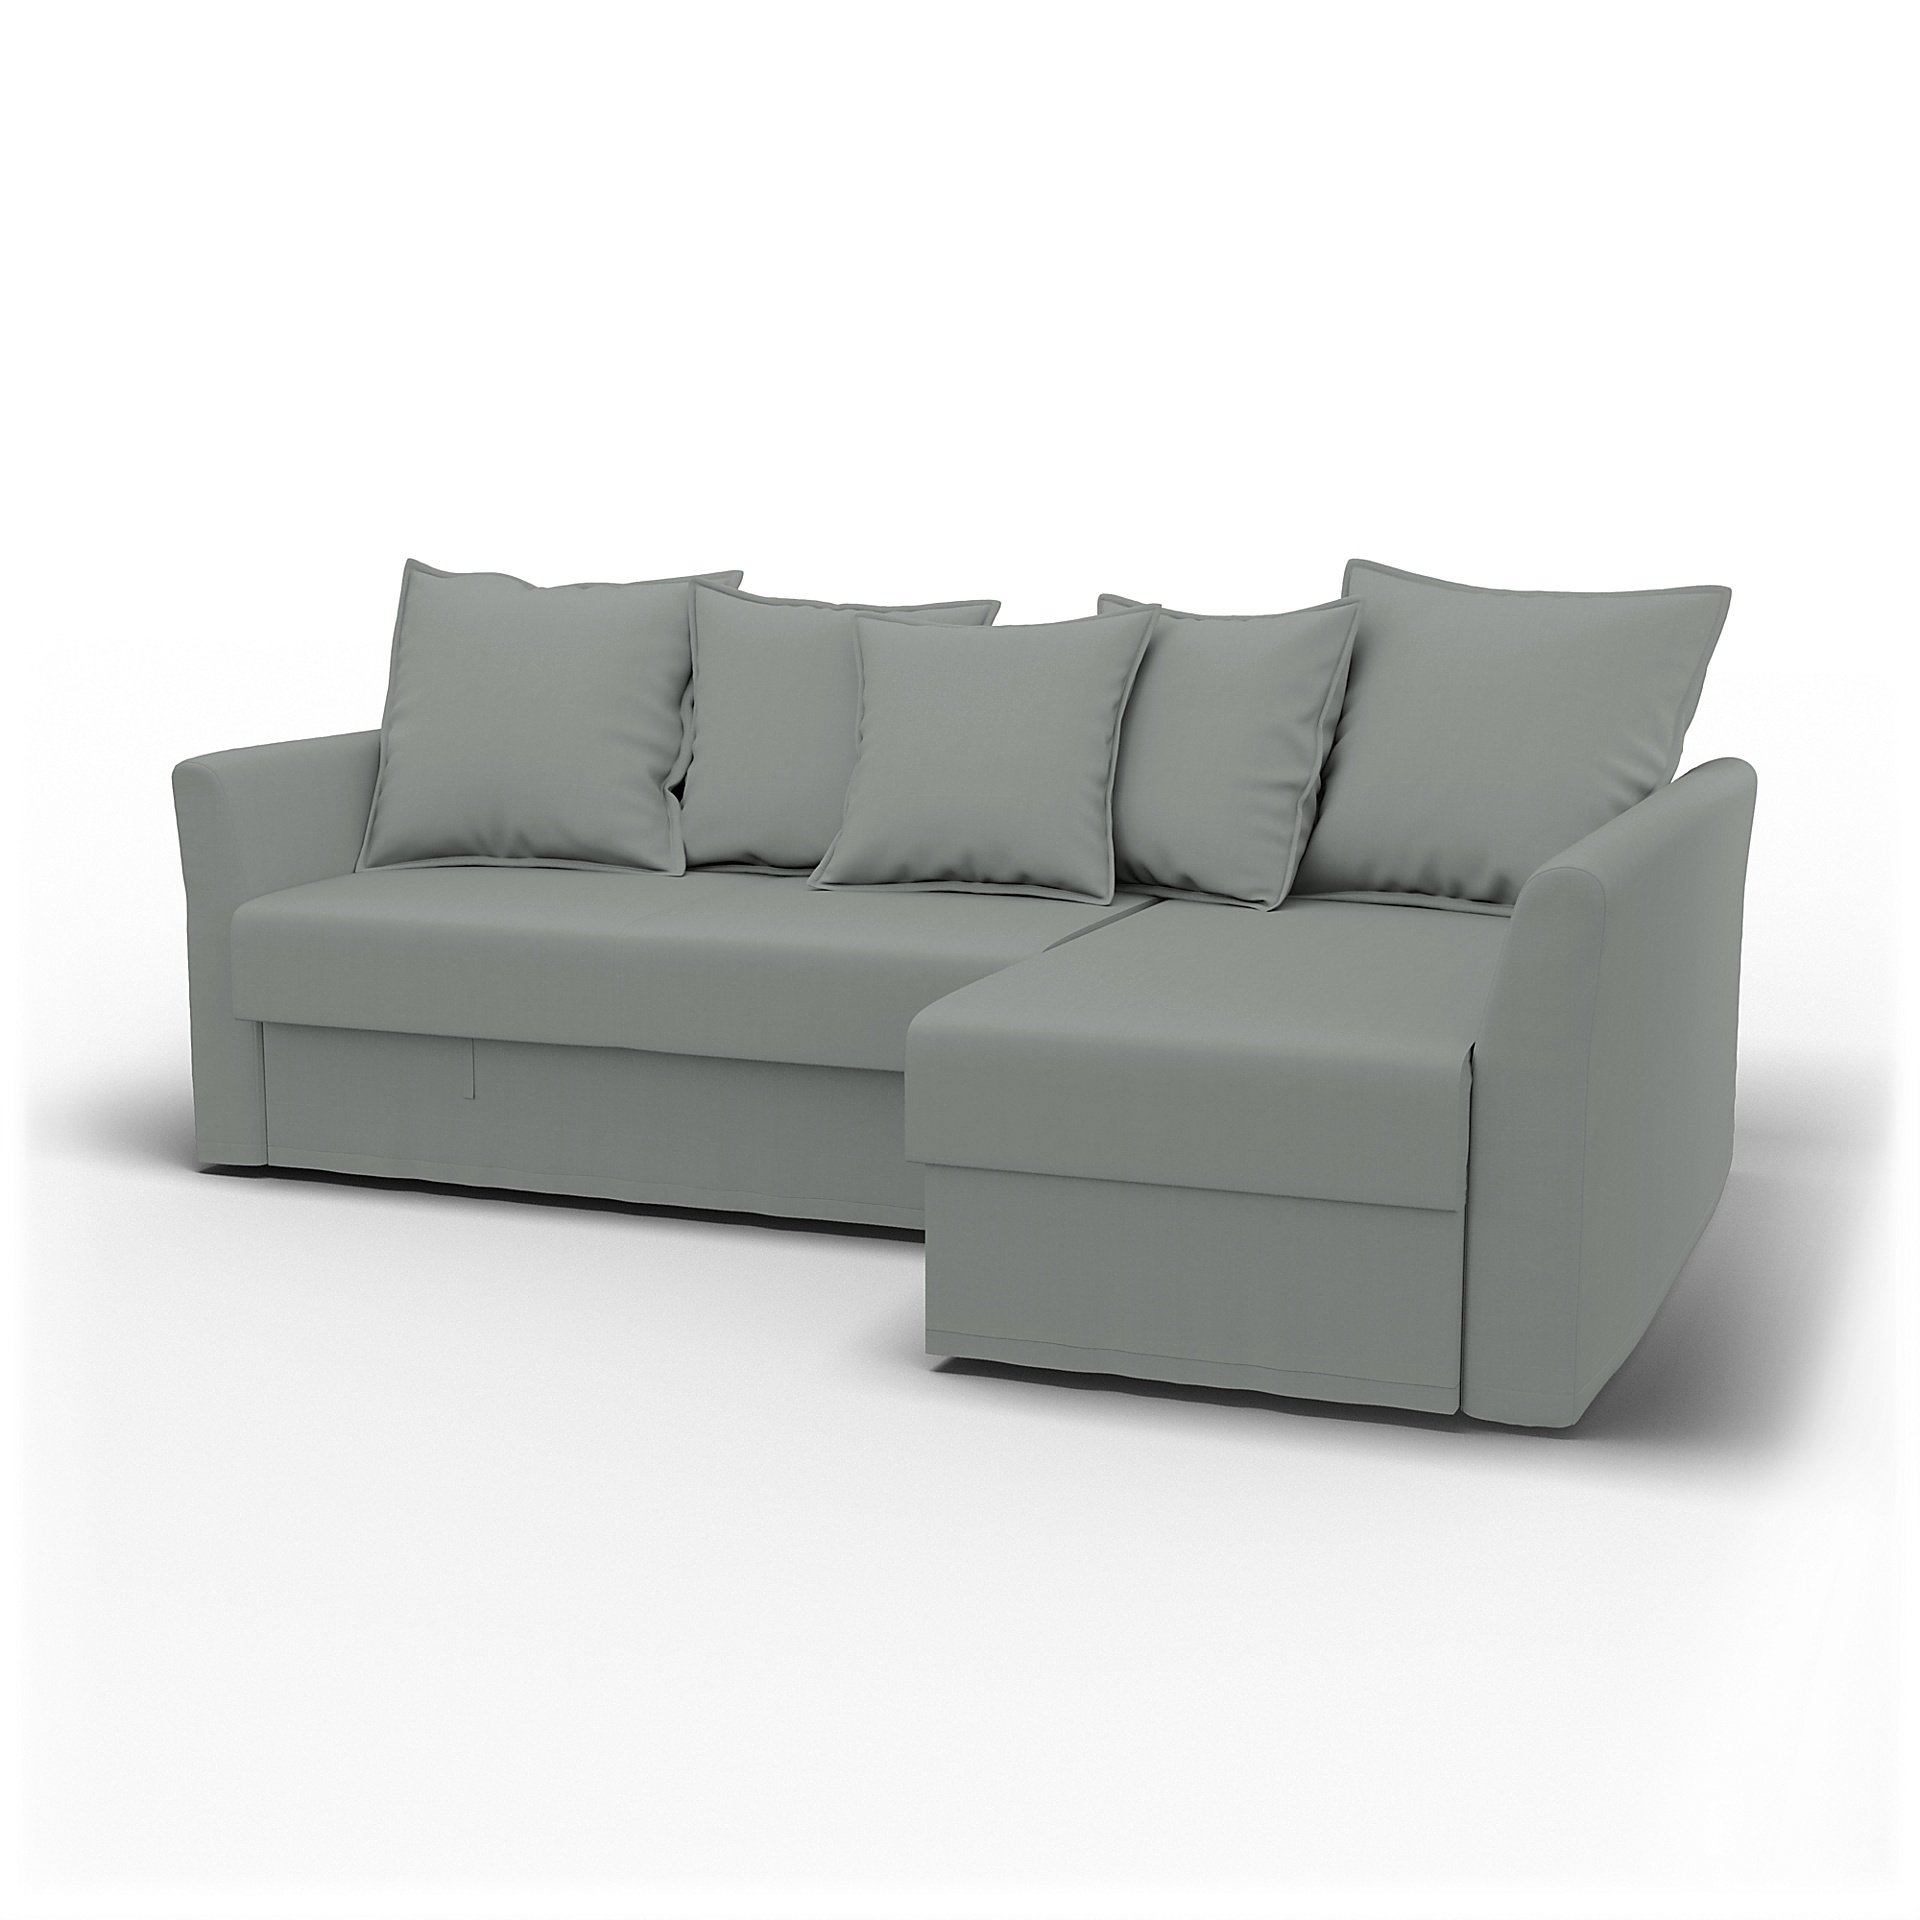 IKEA - Holmsund Sofabed with Chaiselongue, Drizzle, Cotton - Bemz